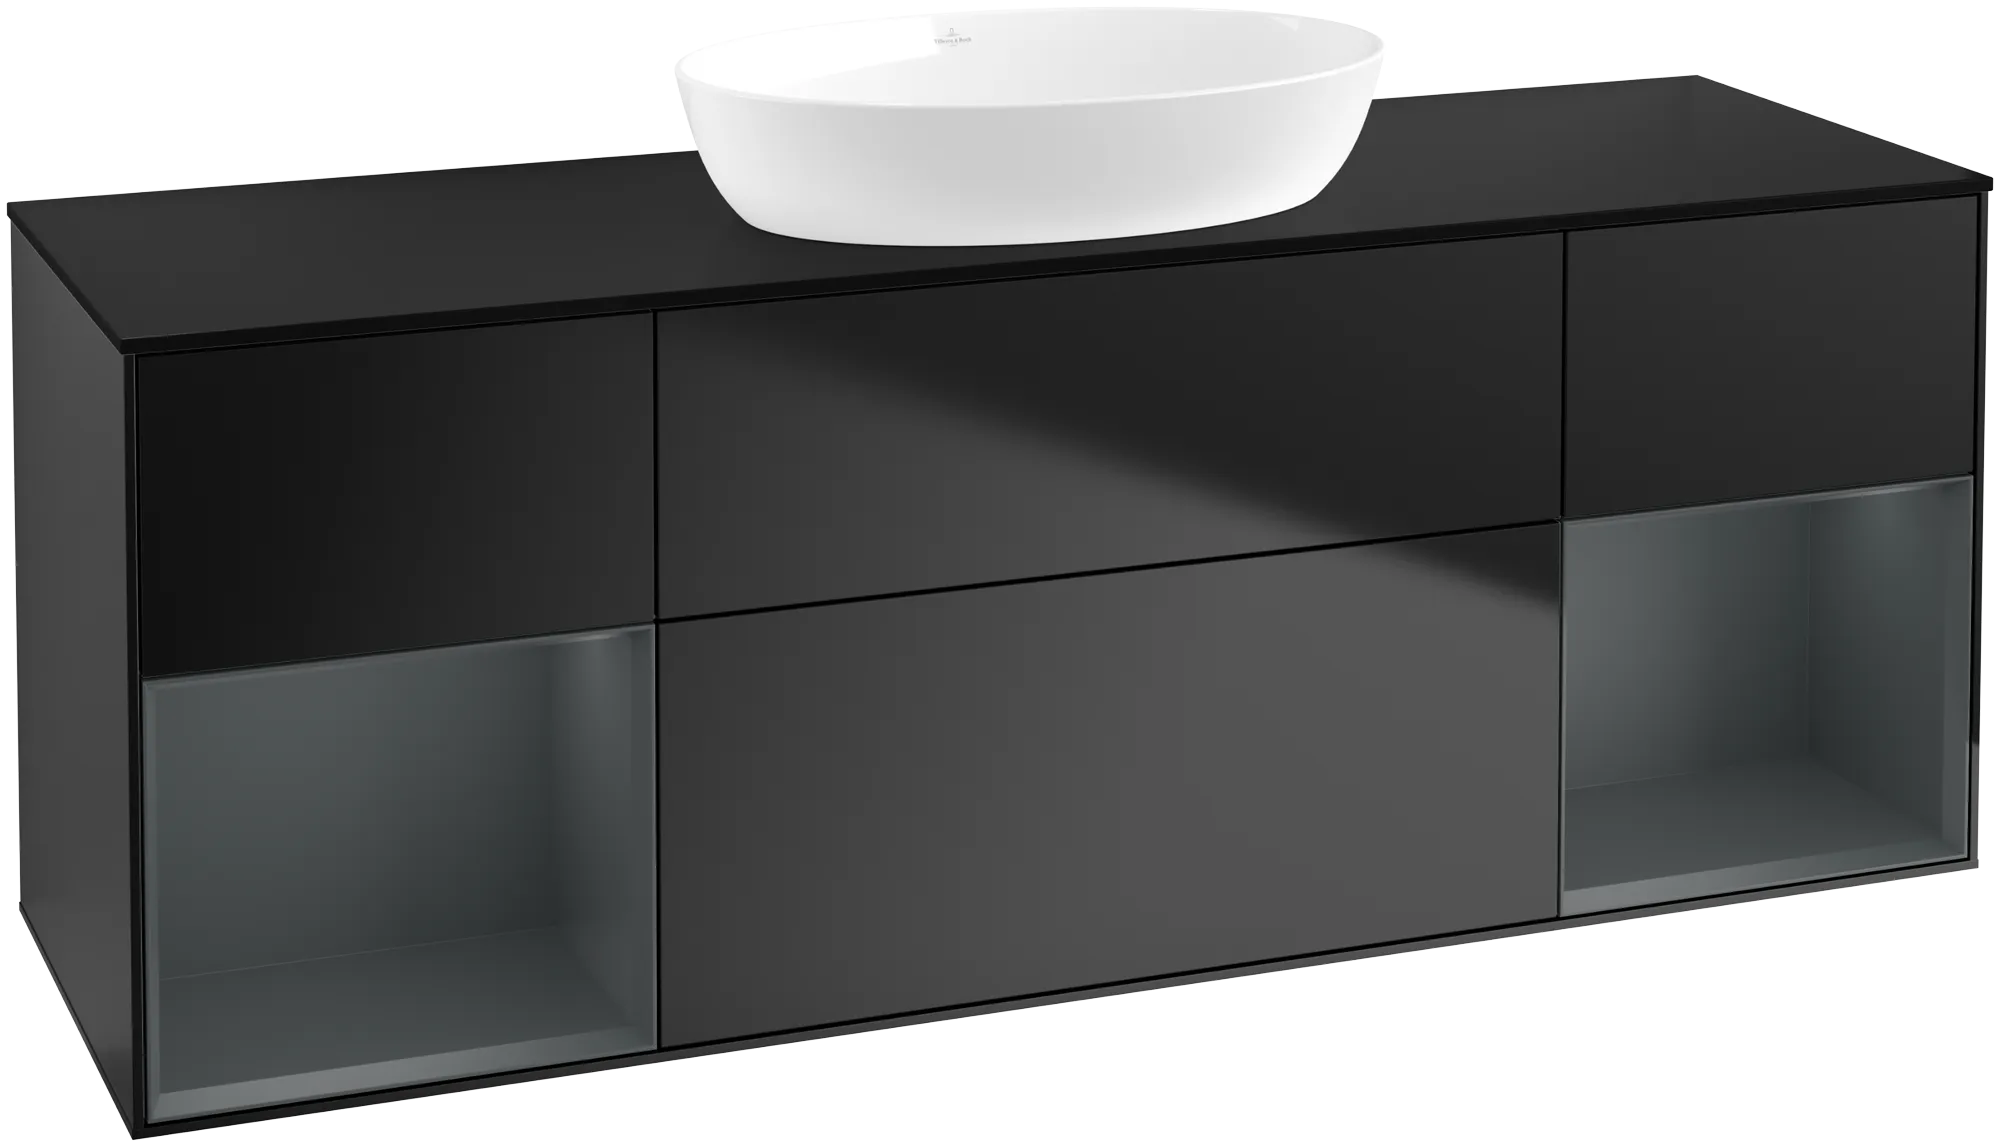 Picture of VILLEROY BOCH Finion Vanity unit, with lighting, 4 pull-out compartments, 1600 x 603 x 501 mm, Black Matt Lacquer / Midnight Blue Matt Lacquer / Glass Black Matt #GD02HGPD